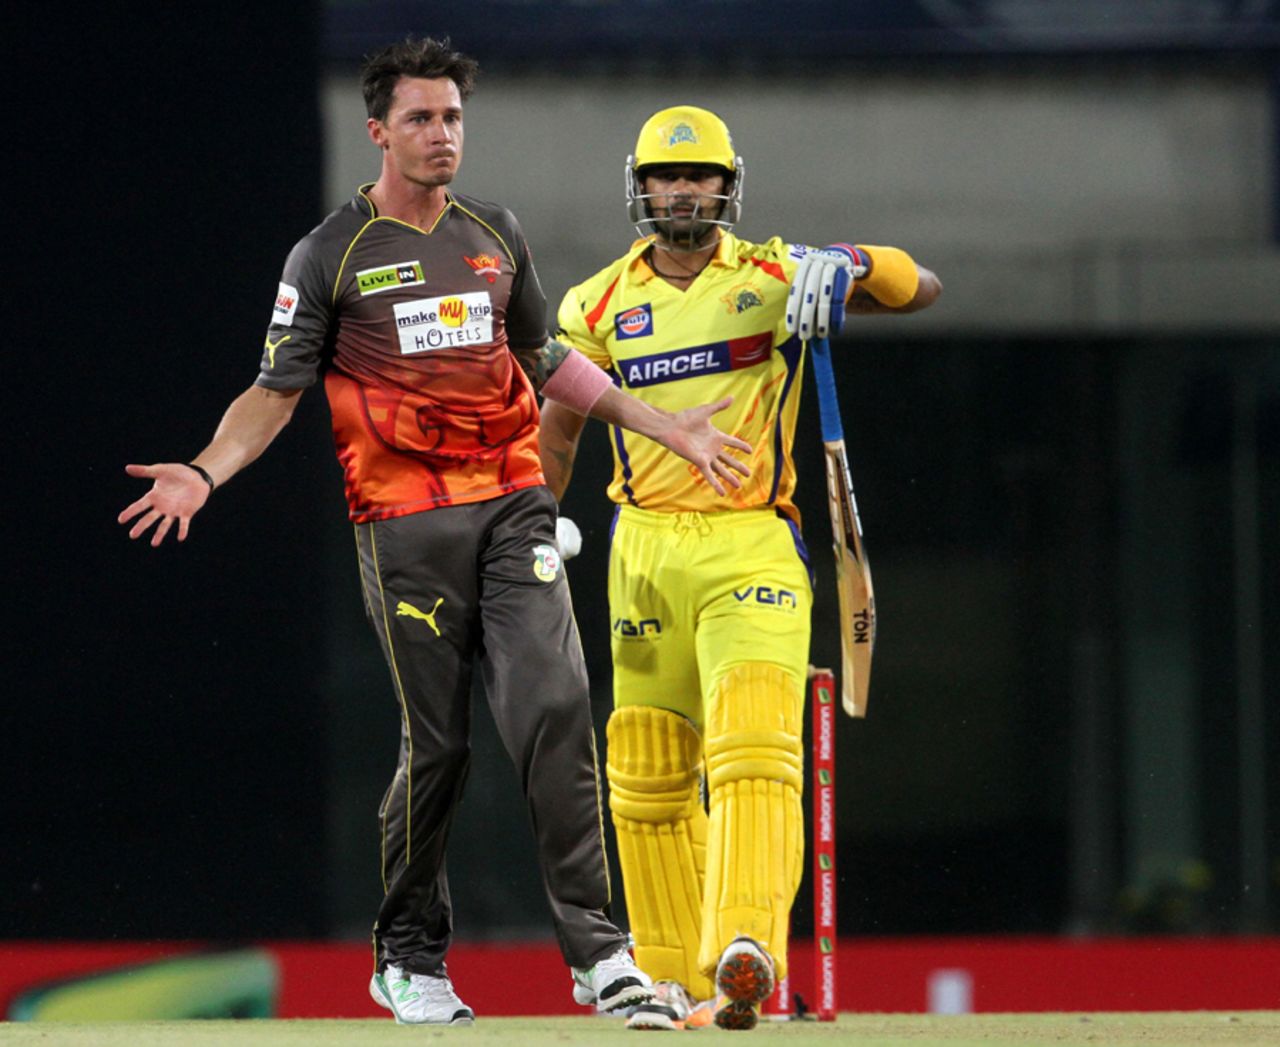 Dale Steyn had M Vijay out for a duck, Chennai Super Kings v Sunrisers Hyderabad, Group B, Champions League 2013, Ranchi, September 26, 2013